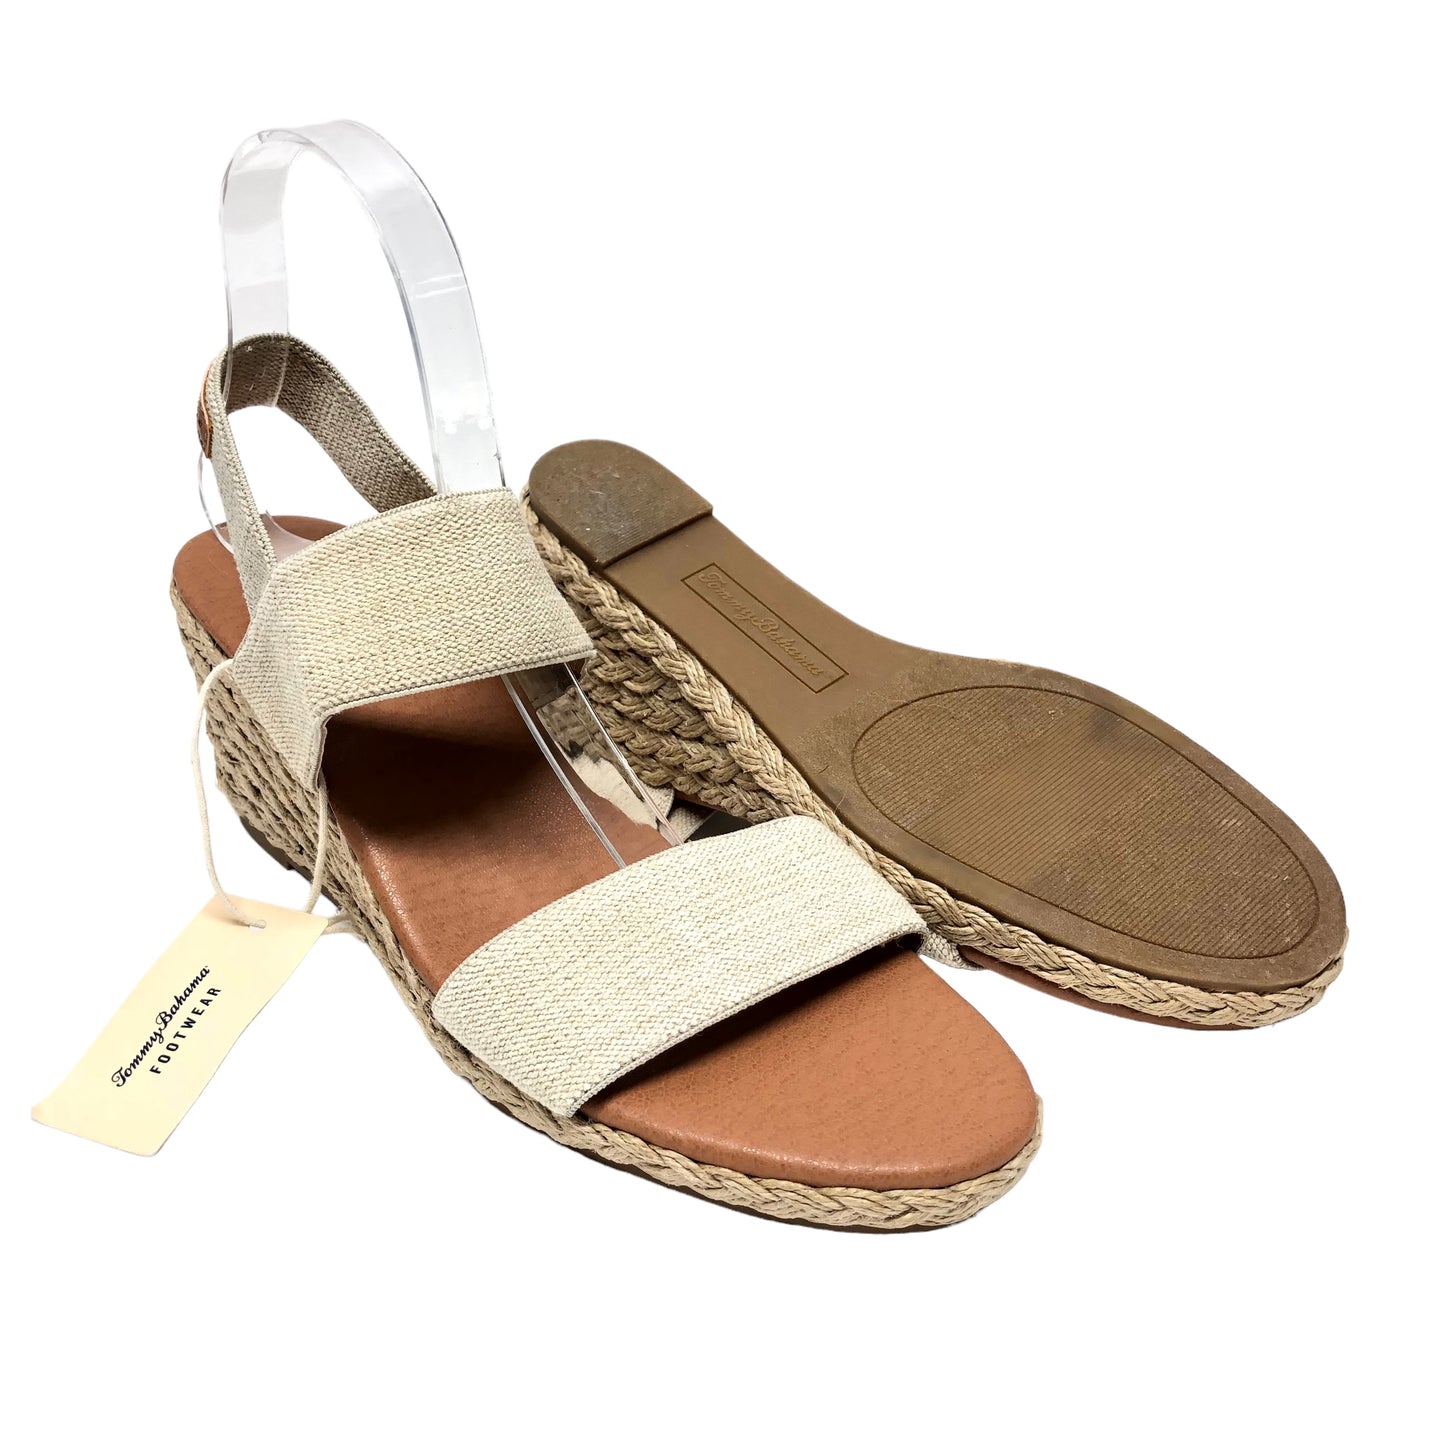 Sandals Heels Wedge By Tommy Bahama  Size: 9.5